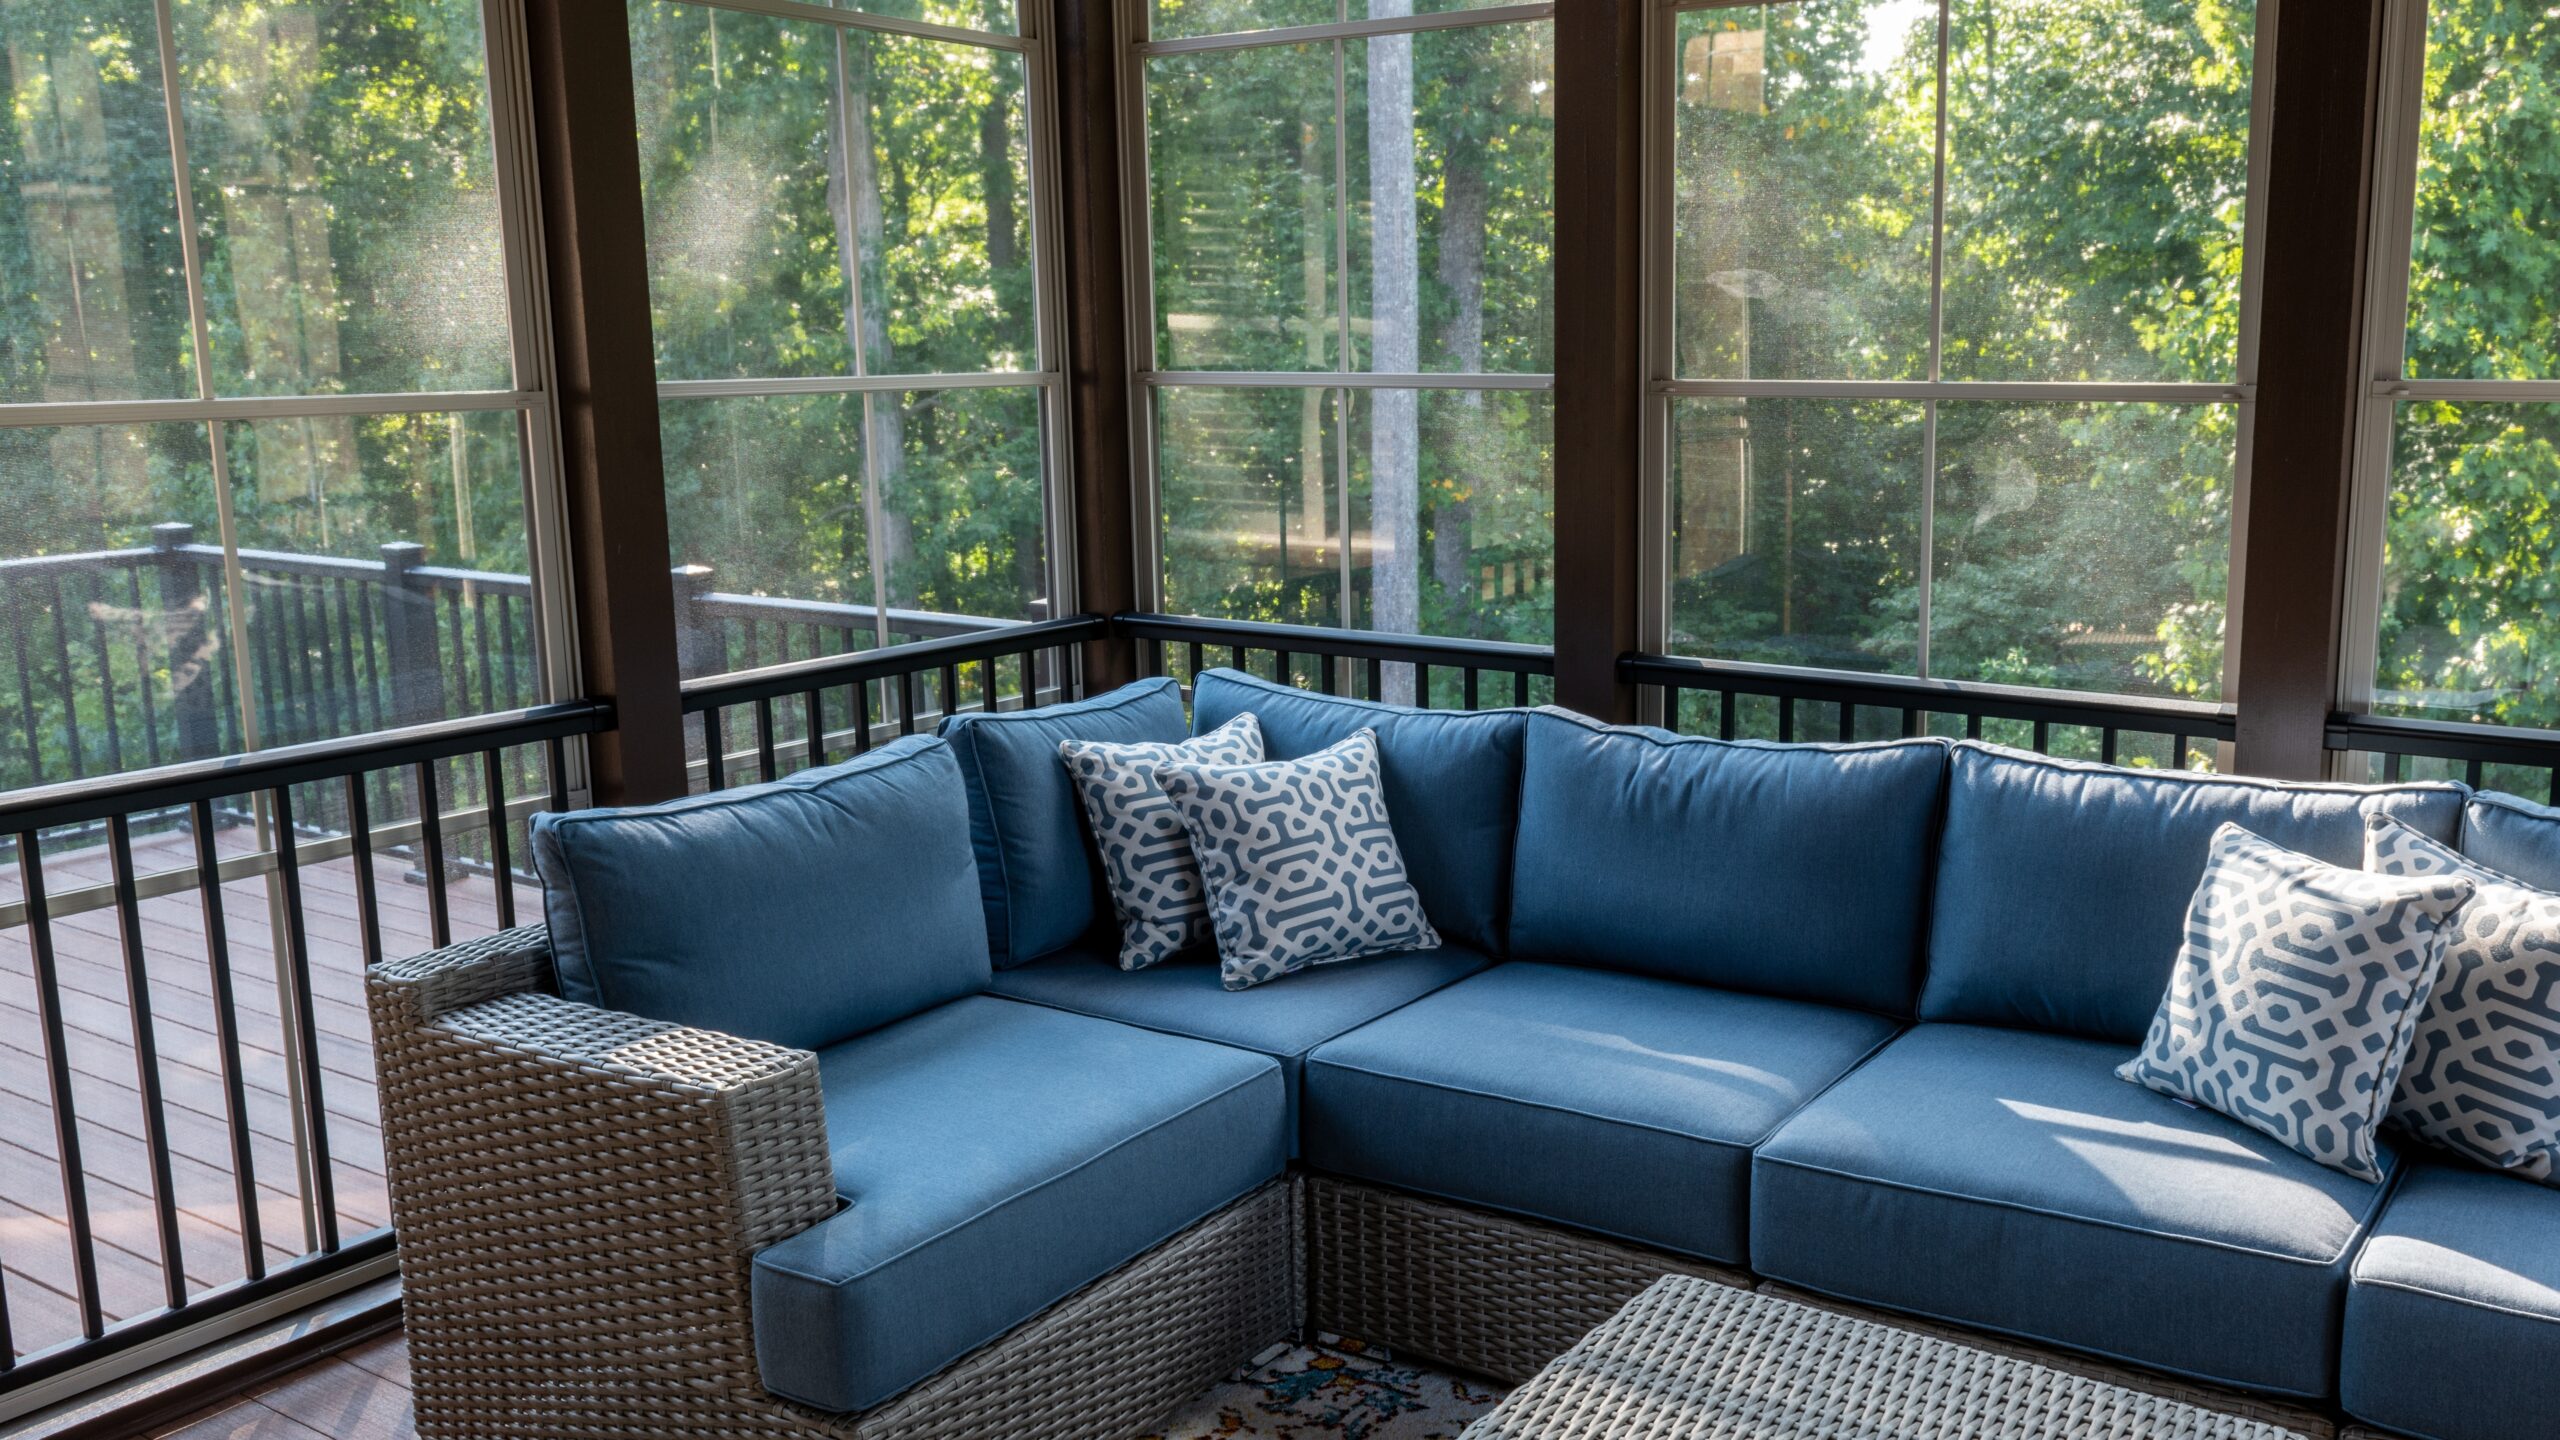 A sunroom with wood trim and a blue couch